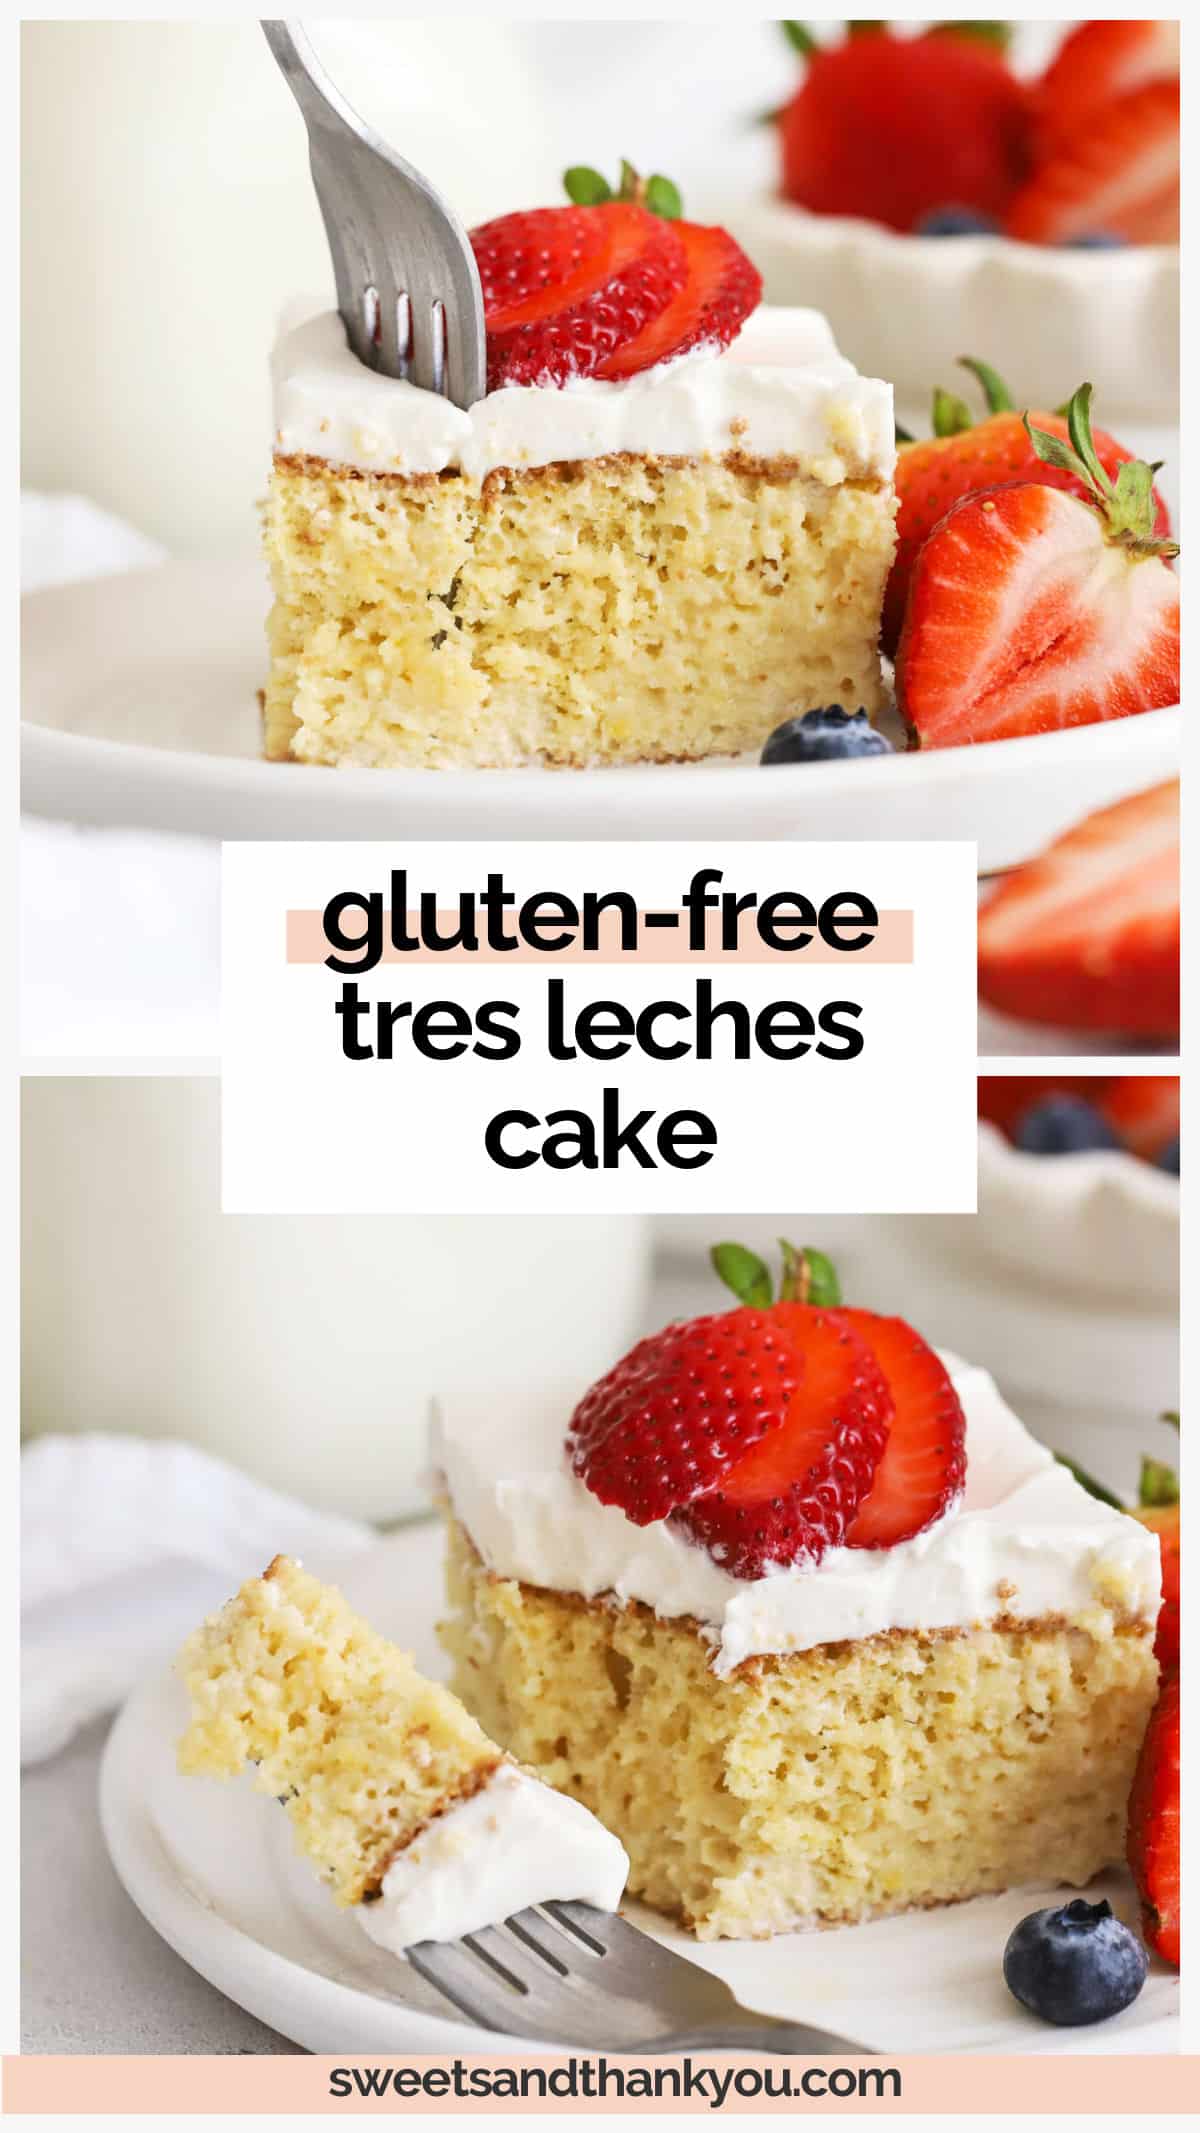 Let's make Gluten-Free Tres Leches Cake! This easy sponge cake gets soaked in a sweet milk mixture and topped with fluffy whipped cream and fresh berries. It's delicious, classic, and SO EASY to make! If you've never had it before, it's basically the original poke cake recipe! This ultra-moist cake tastes sweet and creamy, with notes of vanilla in every bite. It's the perfect sweet dessert to pair with a Mexican dinner or serve for a Cinco de Mayo celebration. 